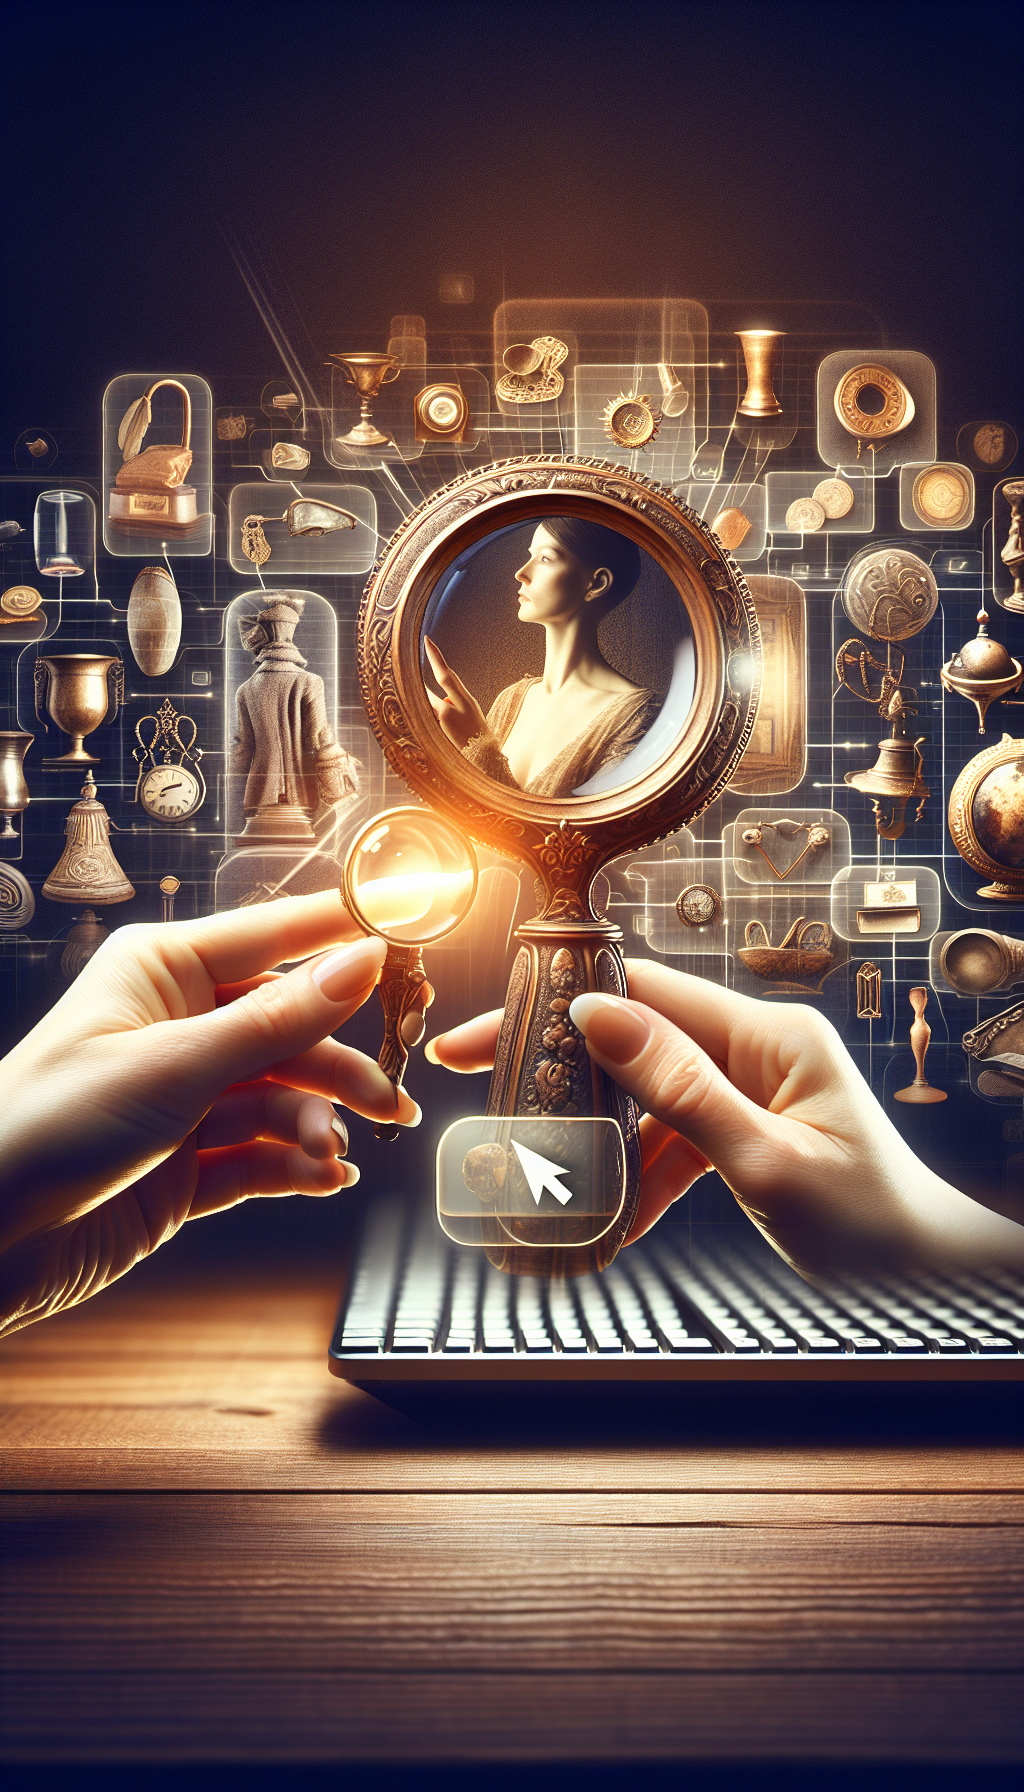 An antique magnifying glass held by a graceful hand emerges from a computer screen, scrutinizing a juxtaposition of diverse vintage items, which are bathed in a warm, digital glow. The reflection on the glass reveals a chat bubble with a certified appraisal badge, symbolizing the online authentication process, melding the past's treasures with modern technology's precision.